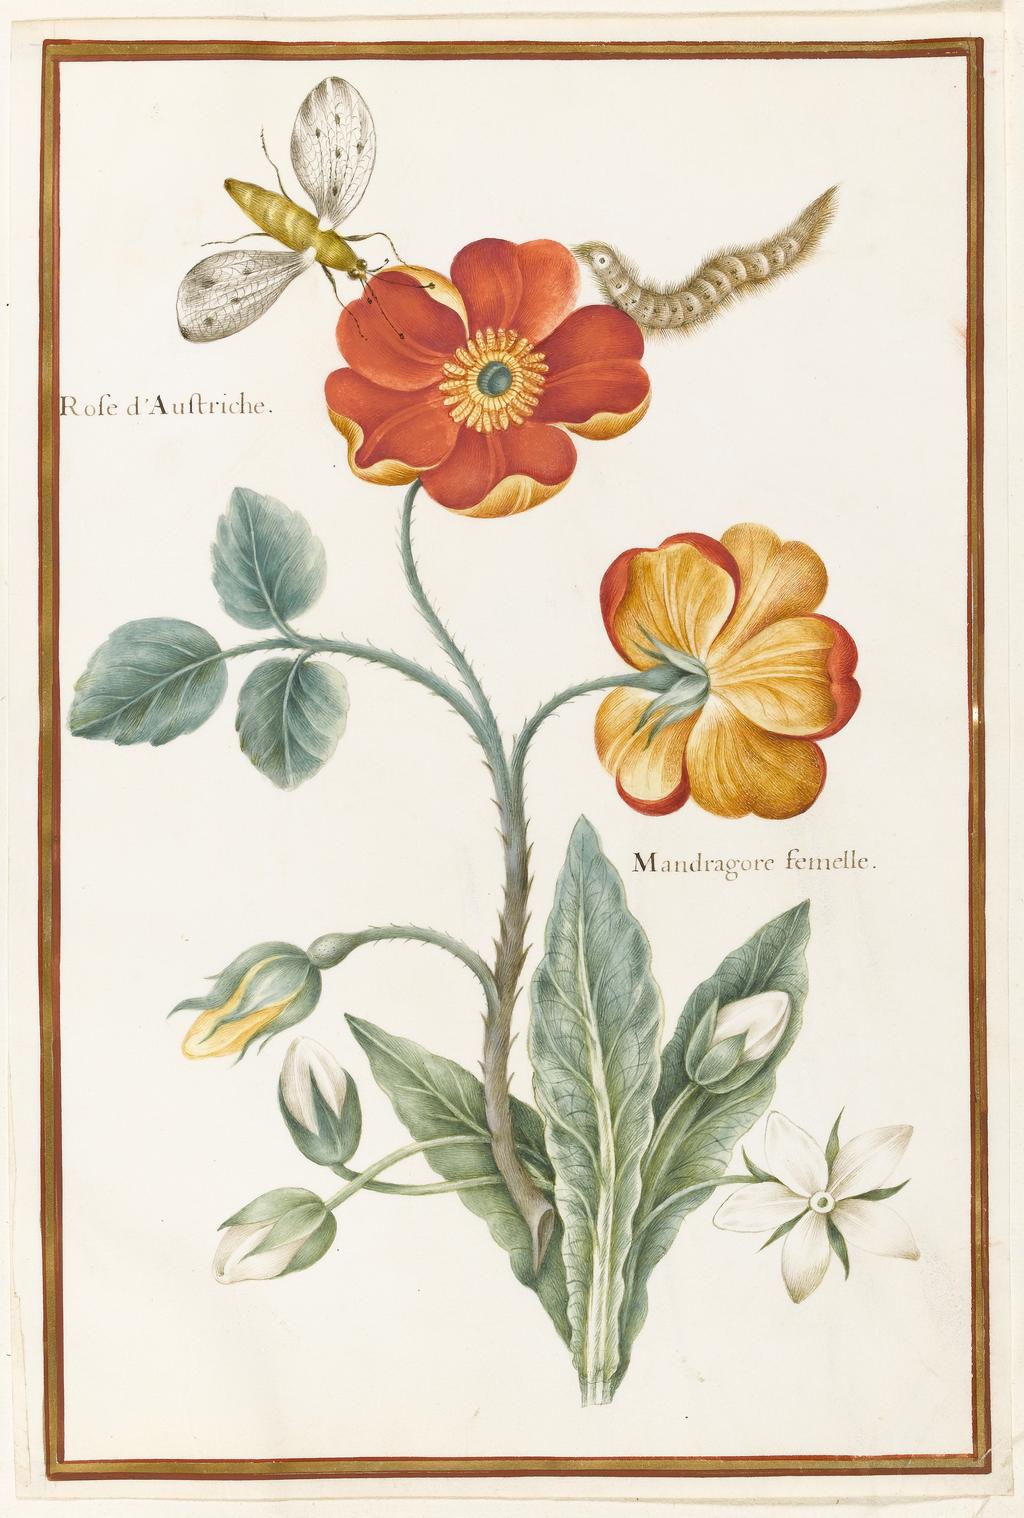 An image of Austrian briar rose, Mandragora (Mandiate). Robert, Nicolas attributed to (French, 1614-1685). Watercolour and bodycolour on vellum, height 319 mm, width 215 mm. Album containing 62 botanical drawings on vellum tipped in on the gilt-edged pages of the album which bear the watermark of an 18th century French paper-maker, Malmenayde of Thiers (active from 1731). Bound in red morocco with clasps, the spine tooled in gilt. The Pages are interleaved with thin protective paper. Ruled lines of red and gold border the drawings on all sides. 17th Century. French.